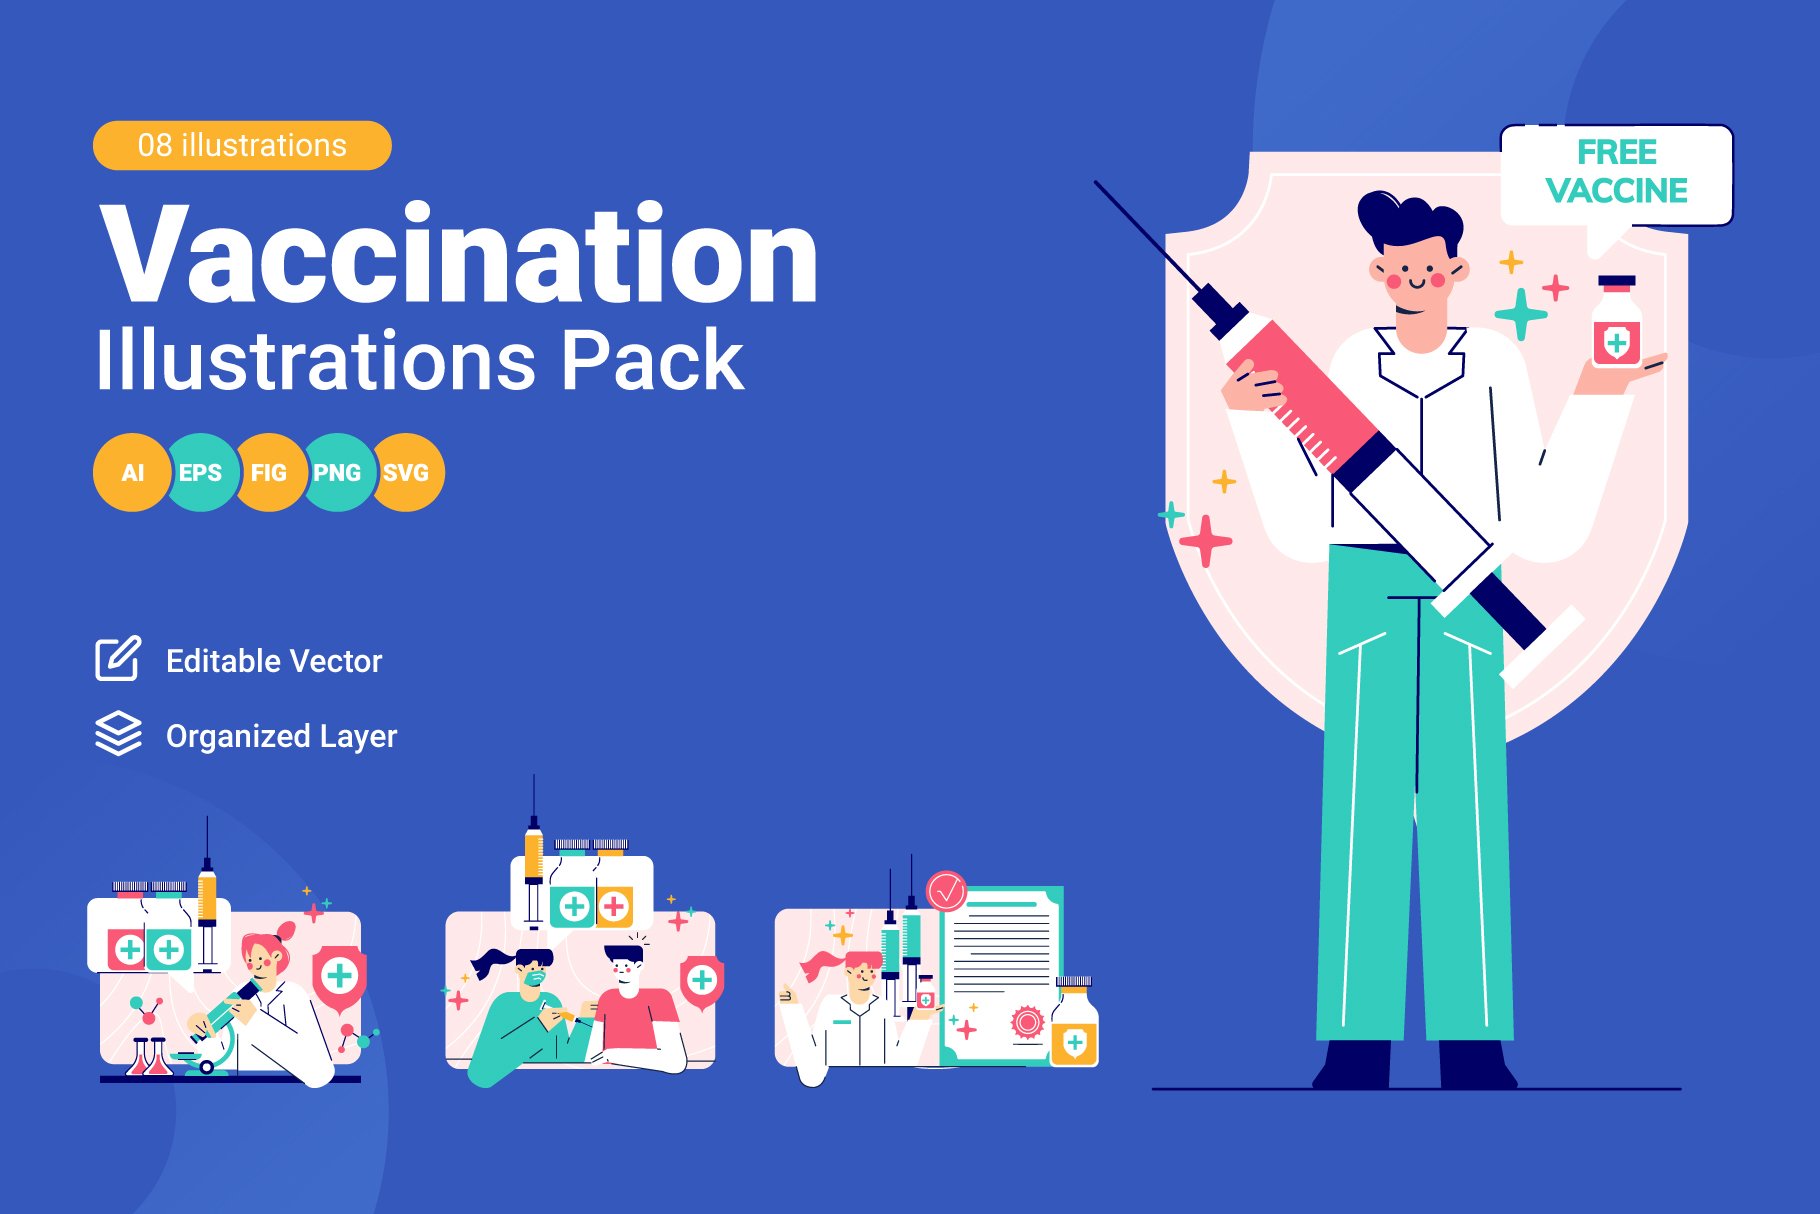 Vaccination Activity Illustrations cover image.